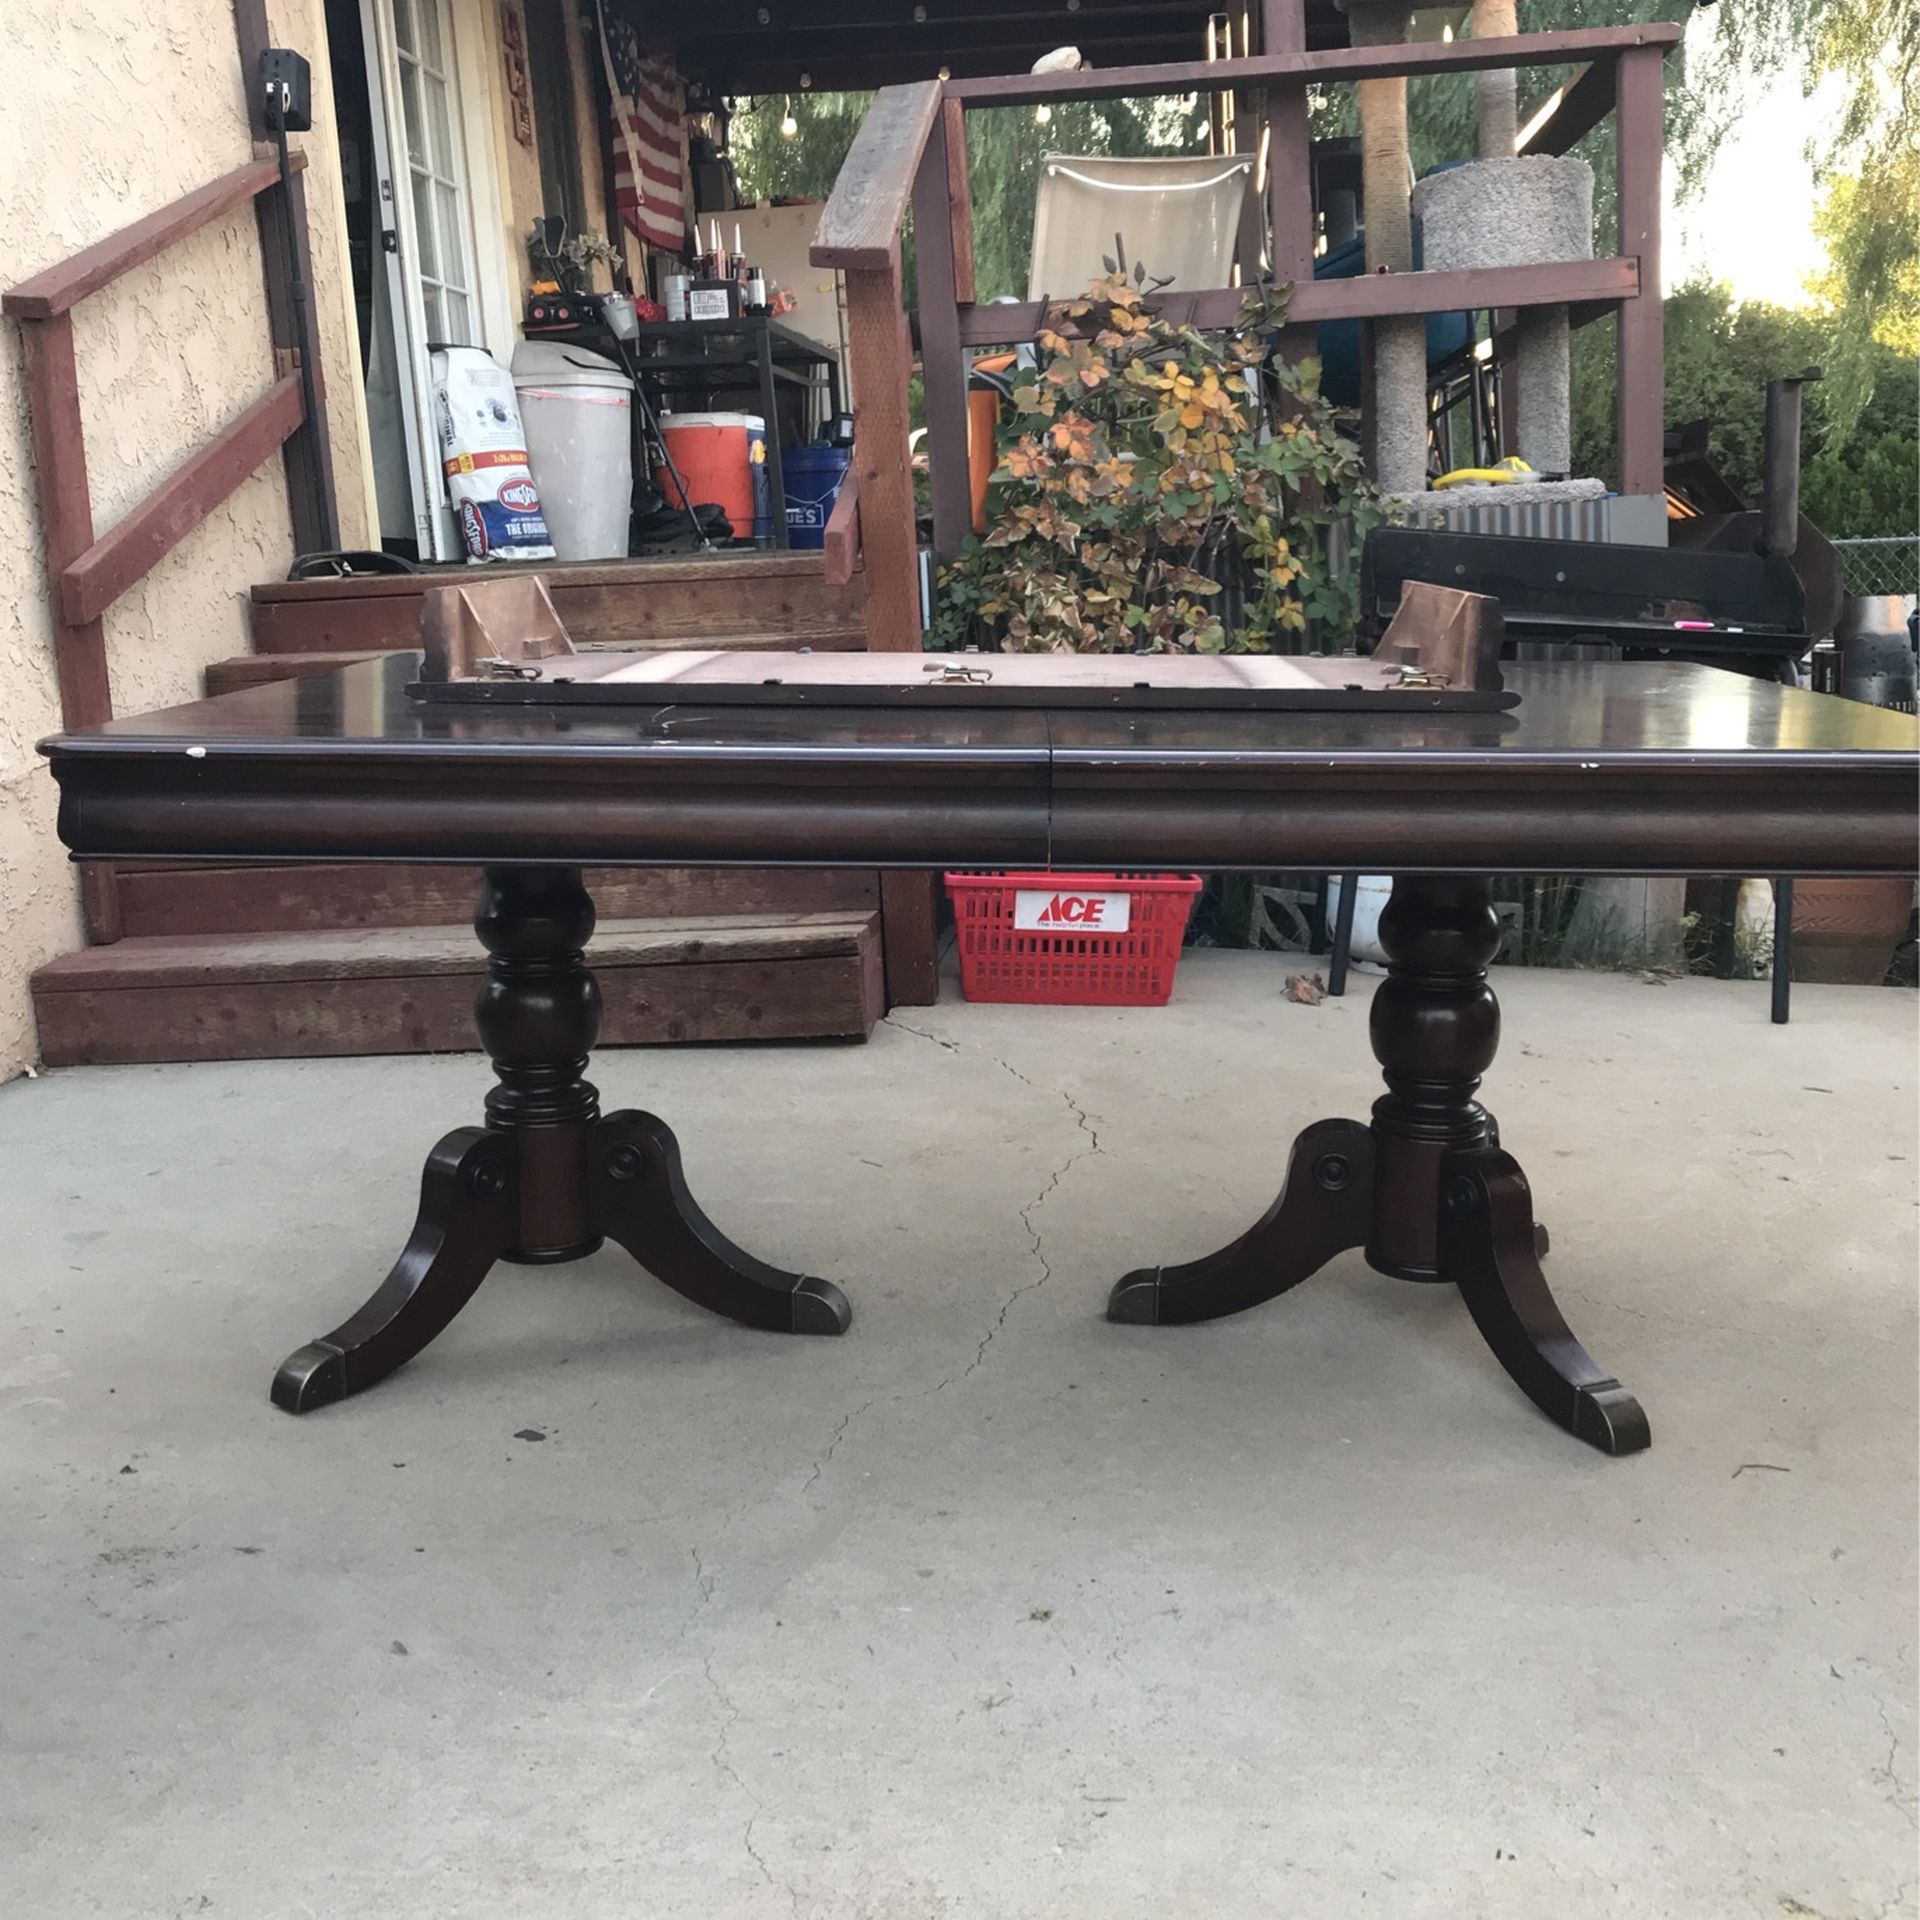 Free kitchen table with chairs